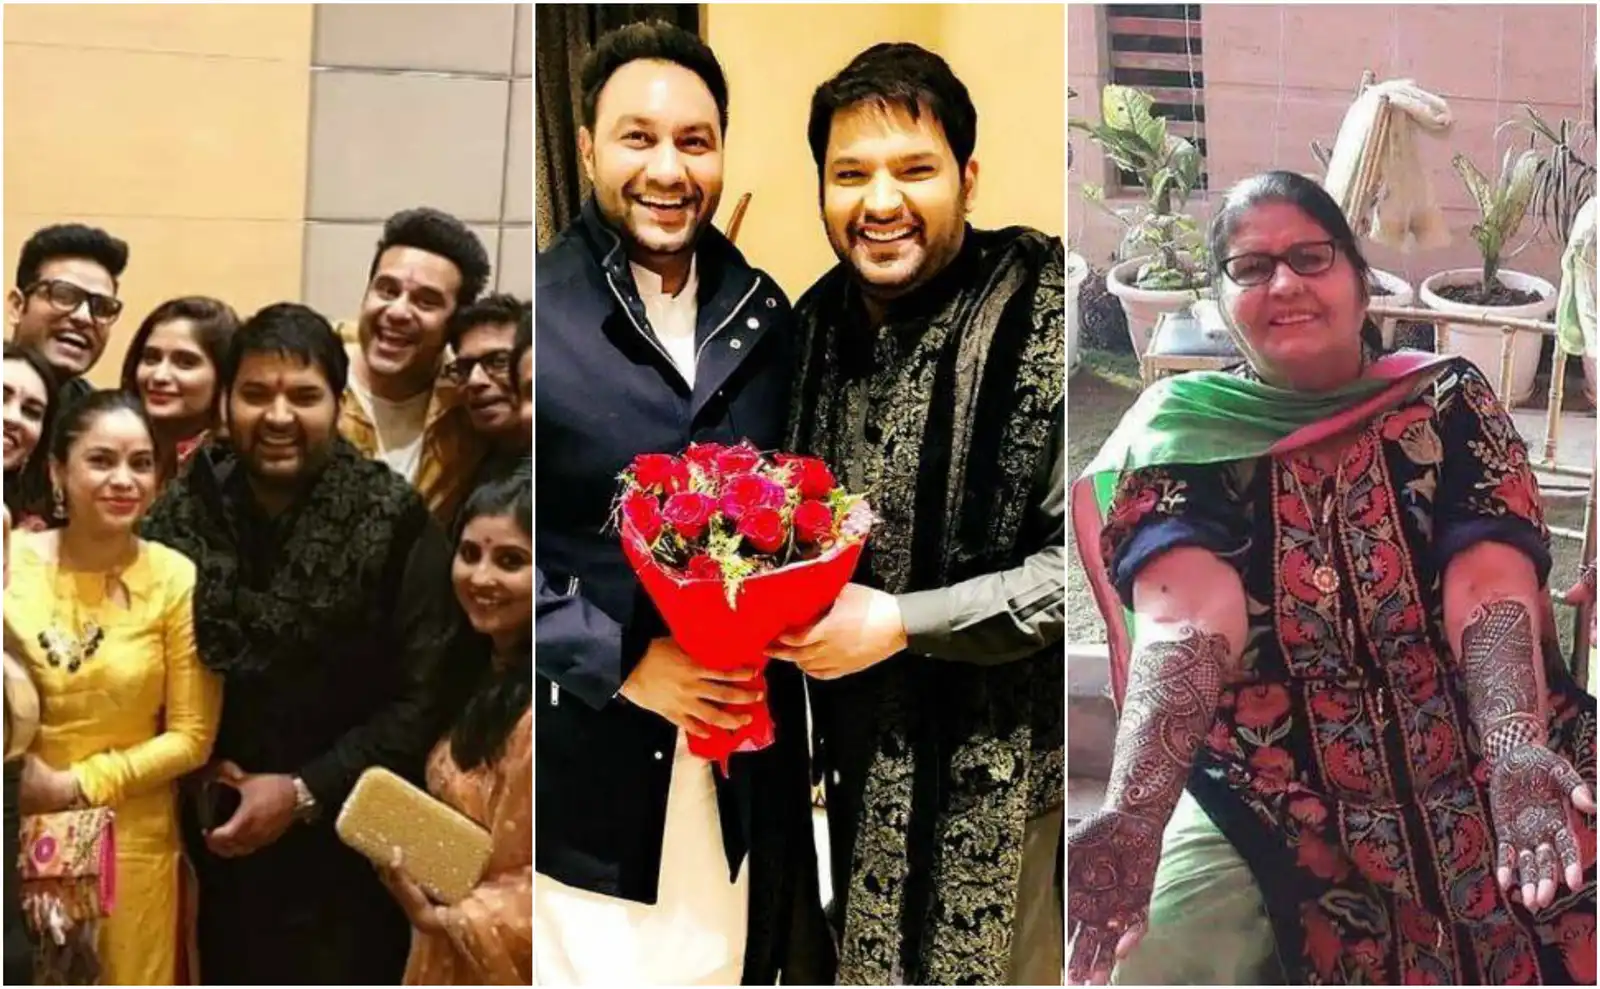 Kapil Sharma Looks Like A Happy Groom With Friends And Family On The Way To His Wedding